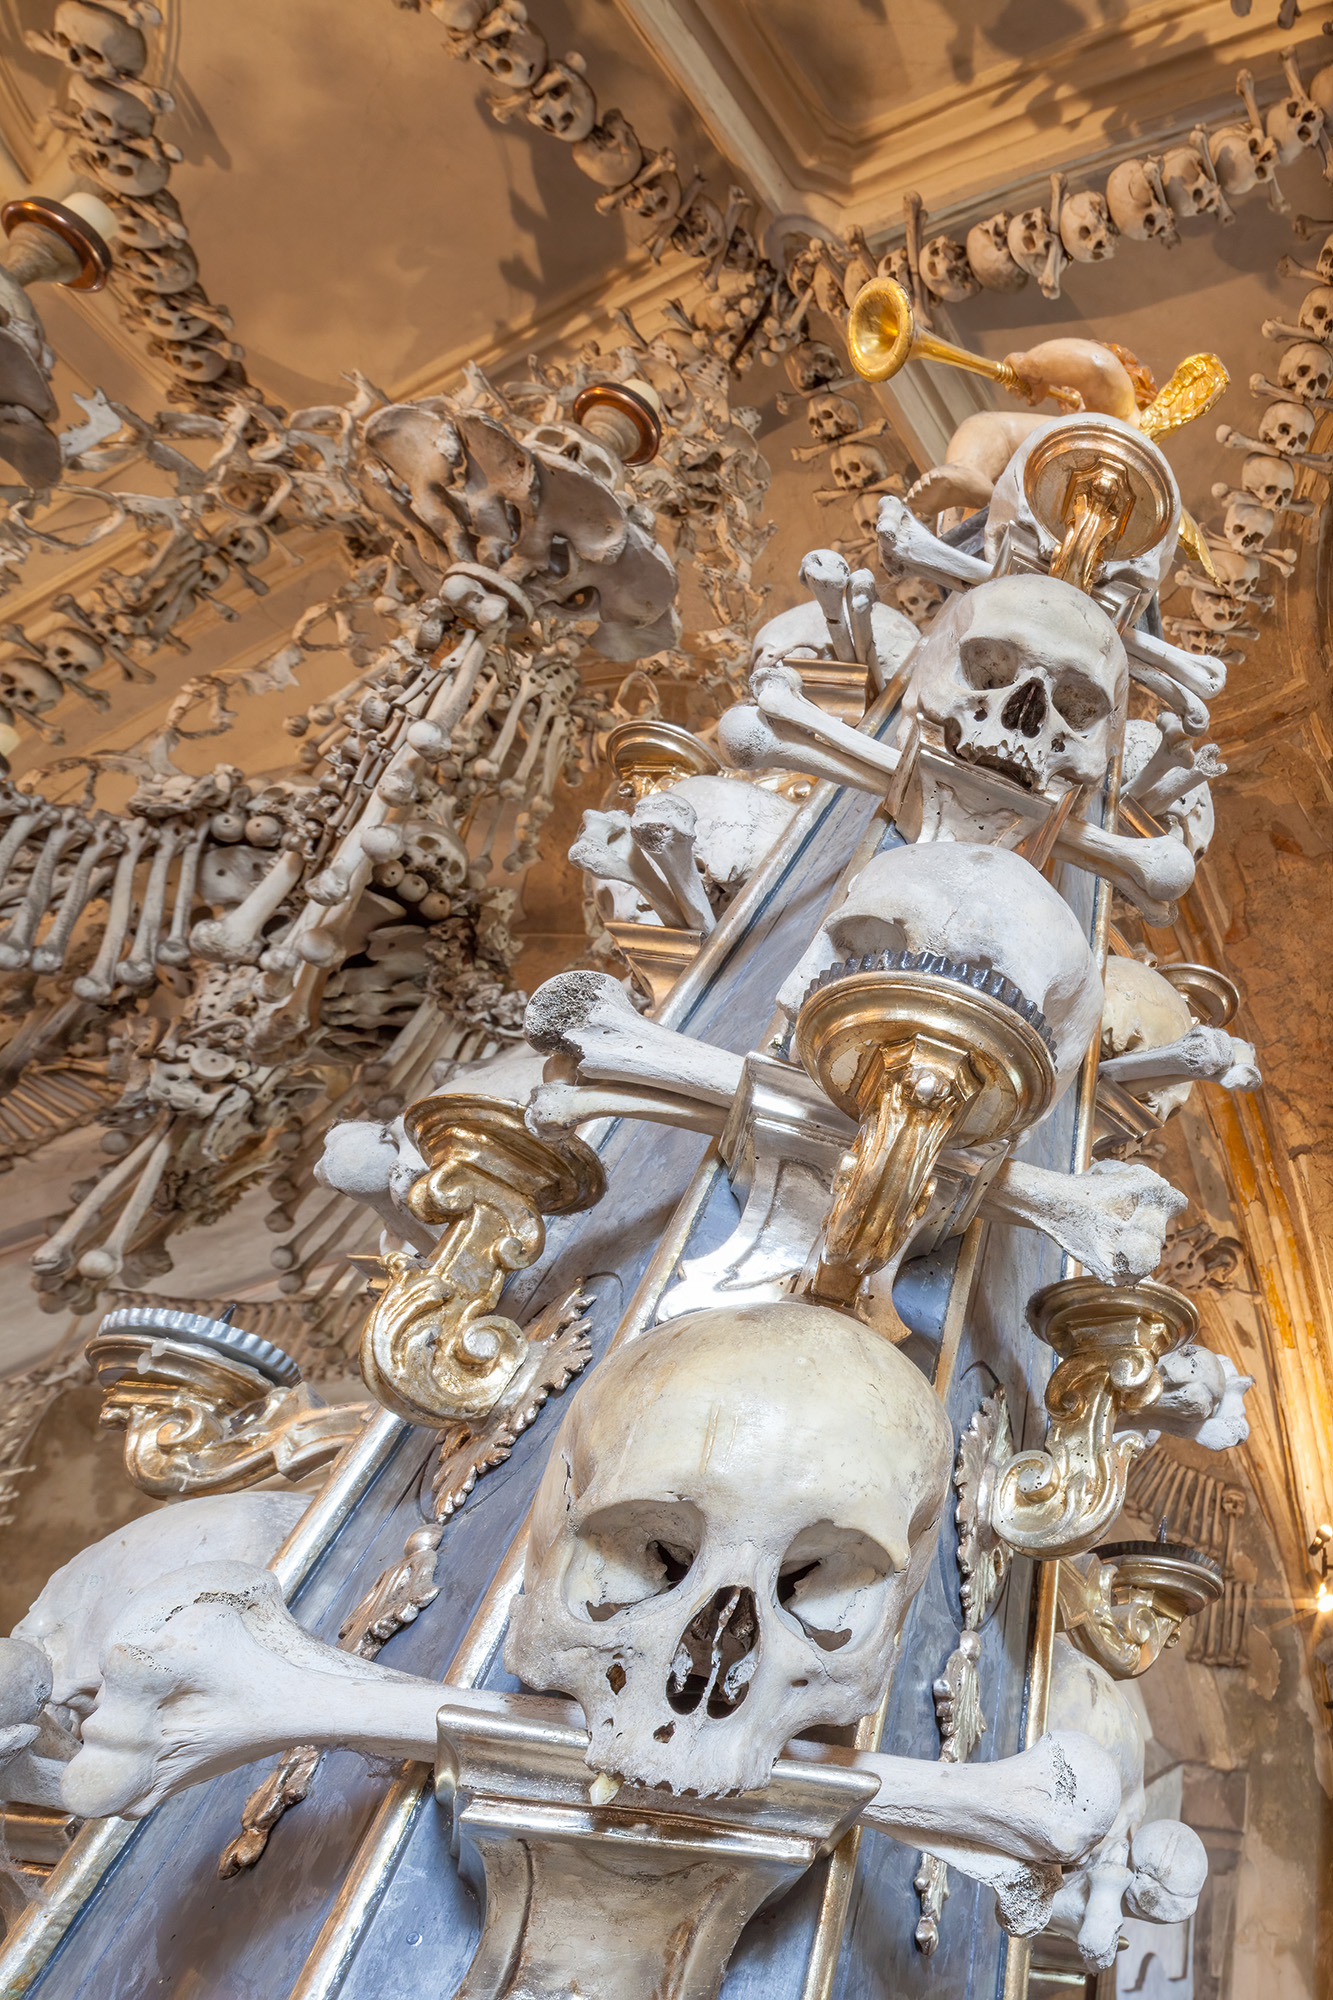 Captured within the haunting interior of Kutna Hora's bone ossuary, this image unveils a chilling sight. A tower formed from...